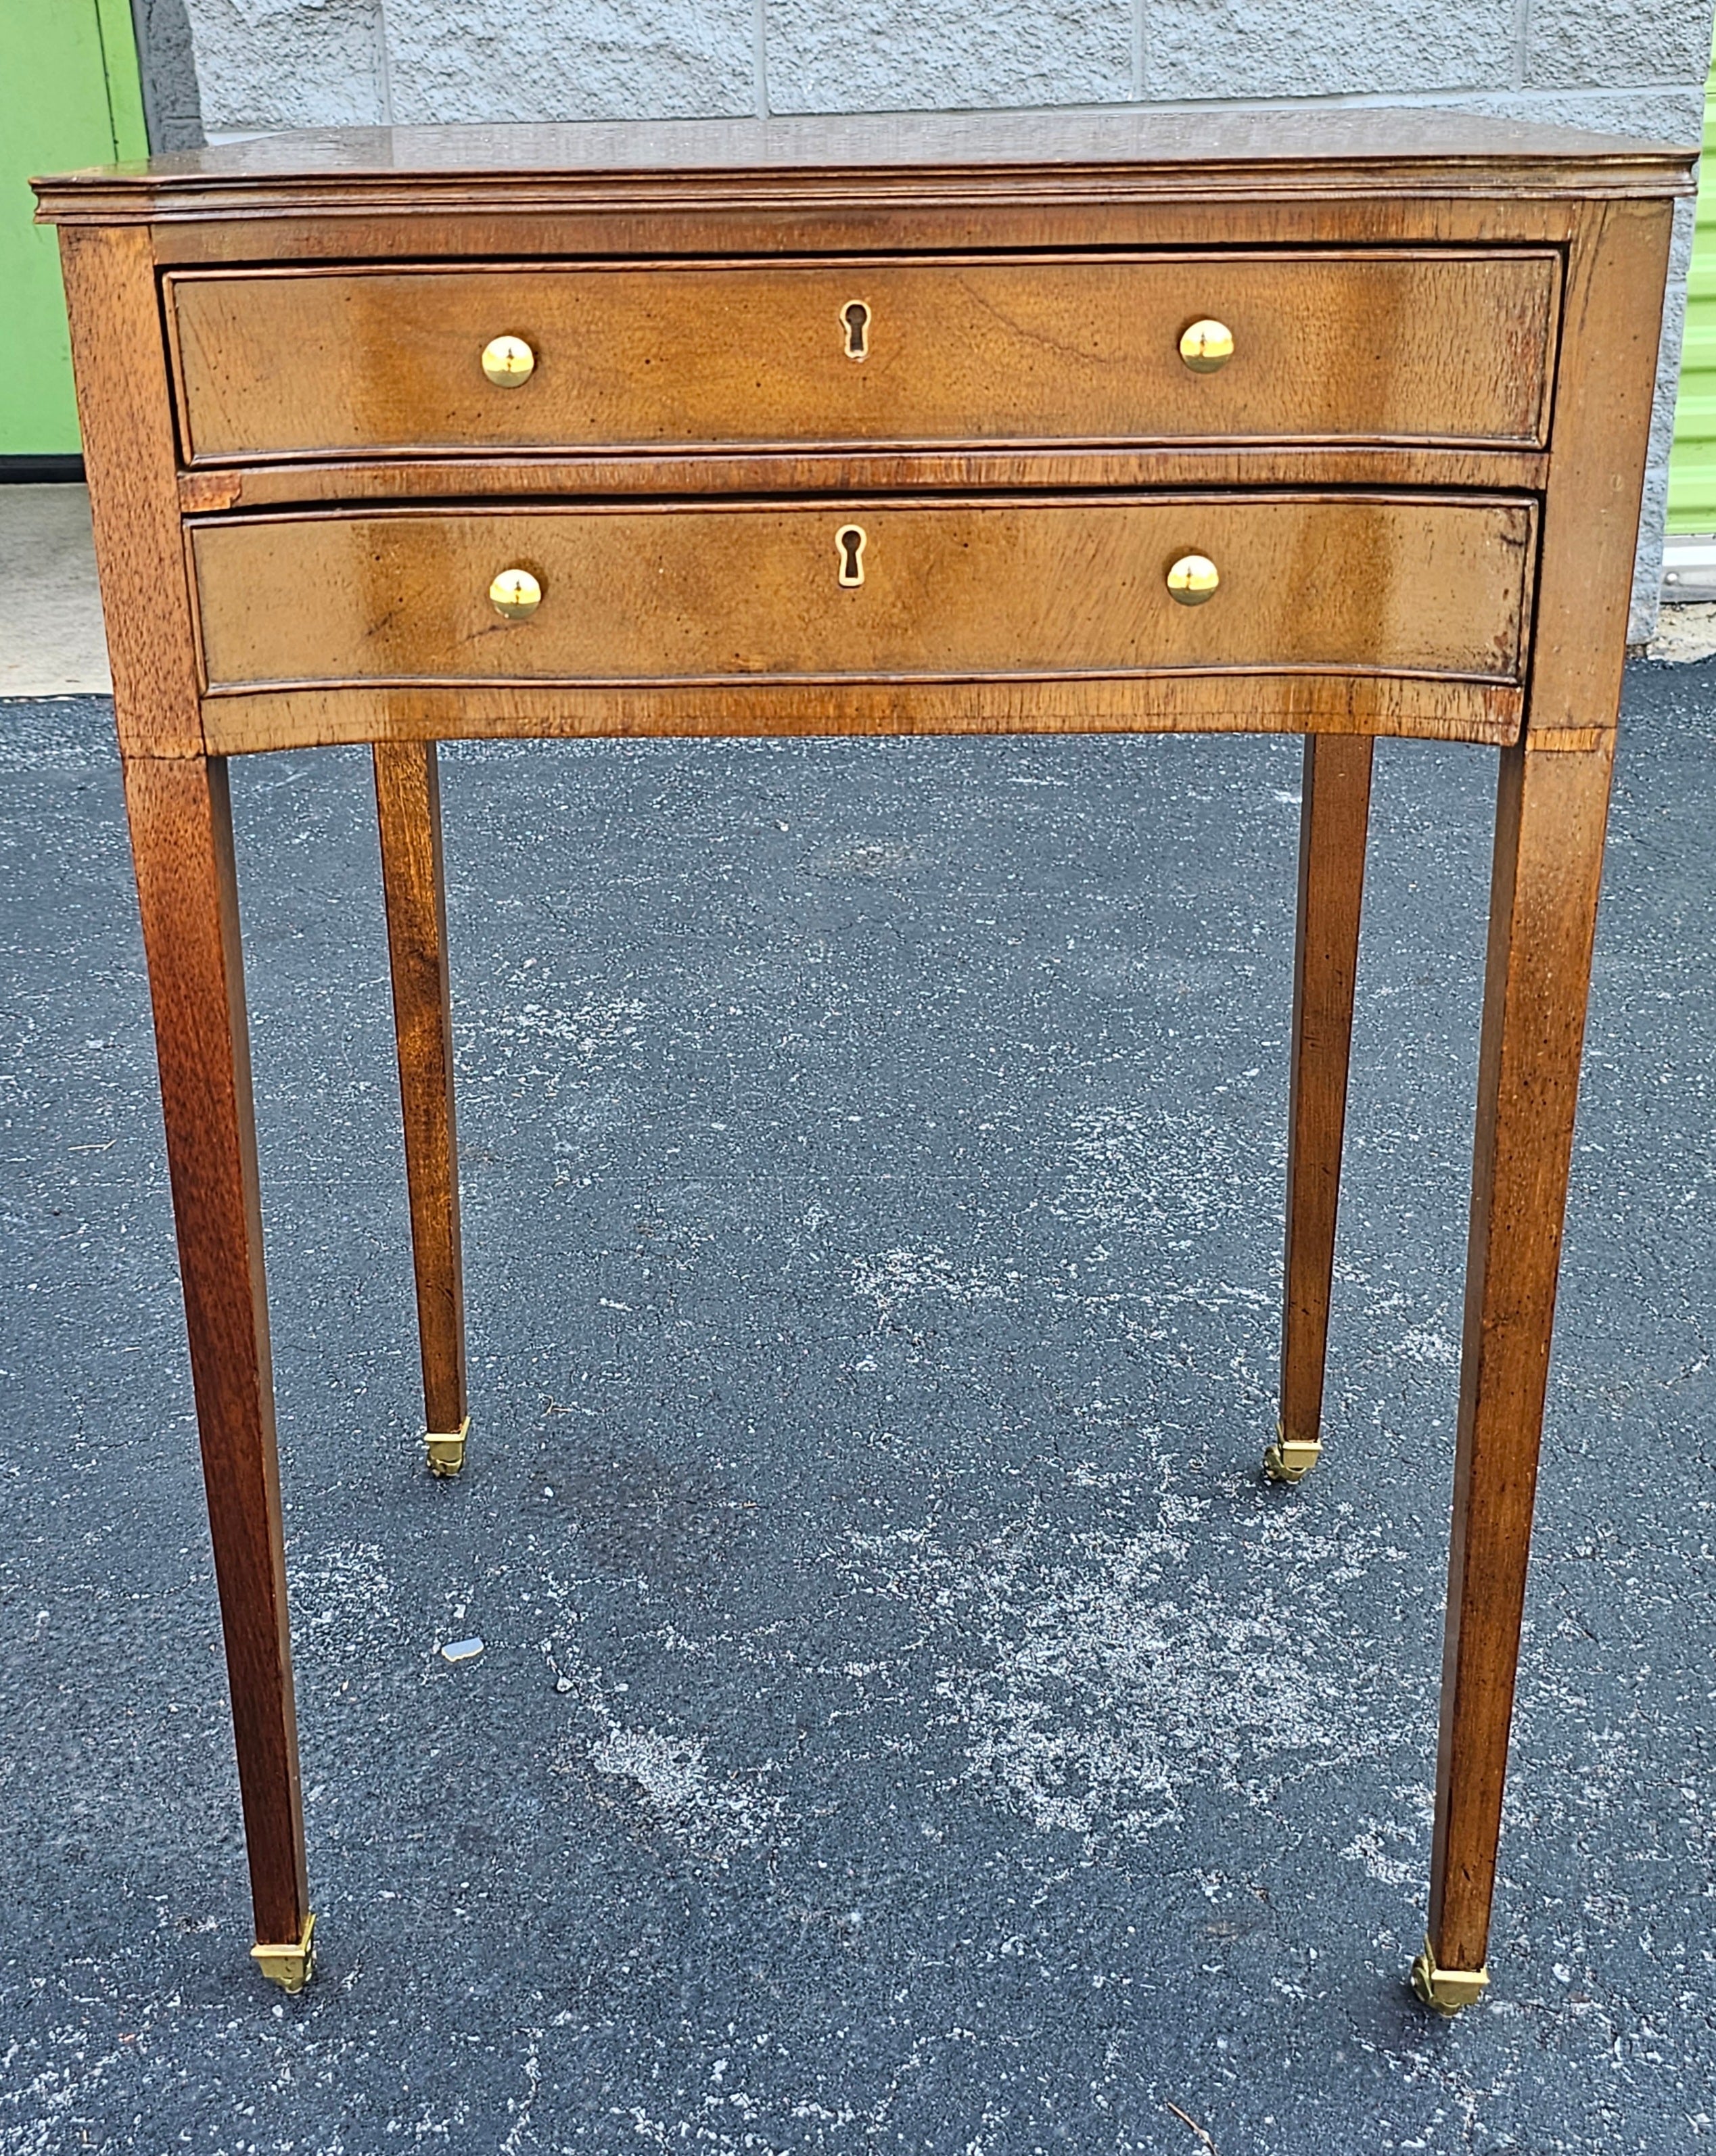 A Baker Furniture Company Hictoric Charleston Collection Two Drawer Side Table with tapered legs termination with brass savots on Wheels. Measures 19.25